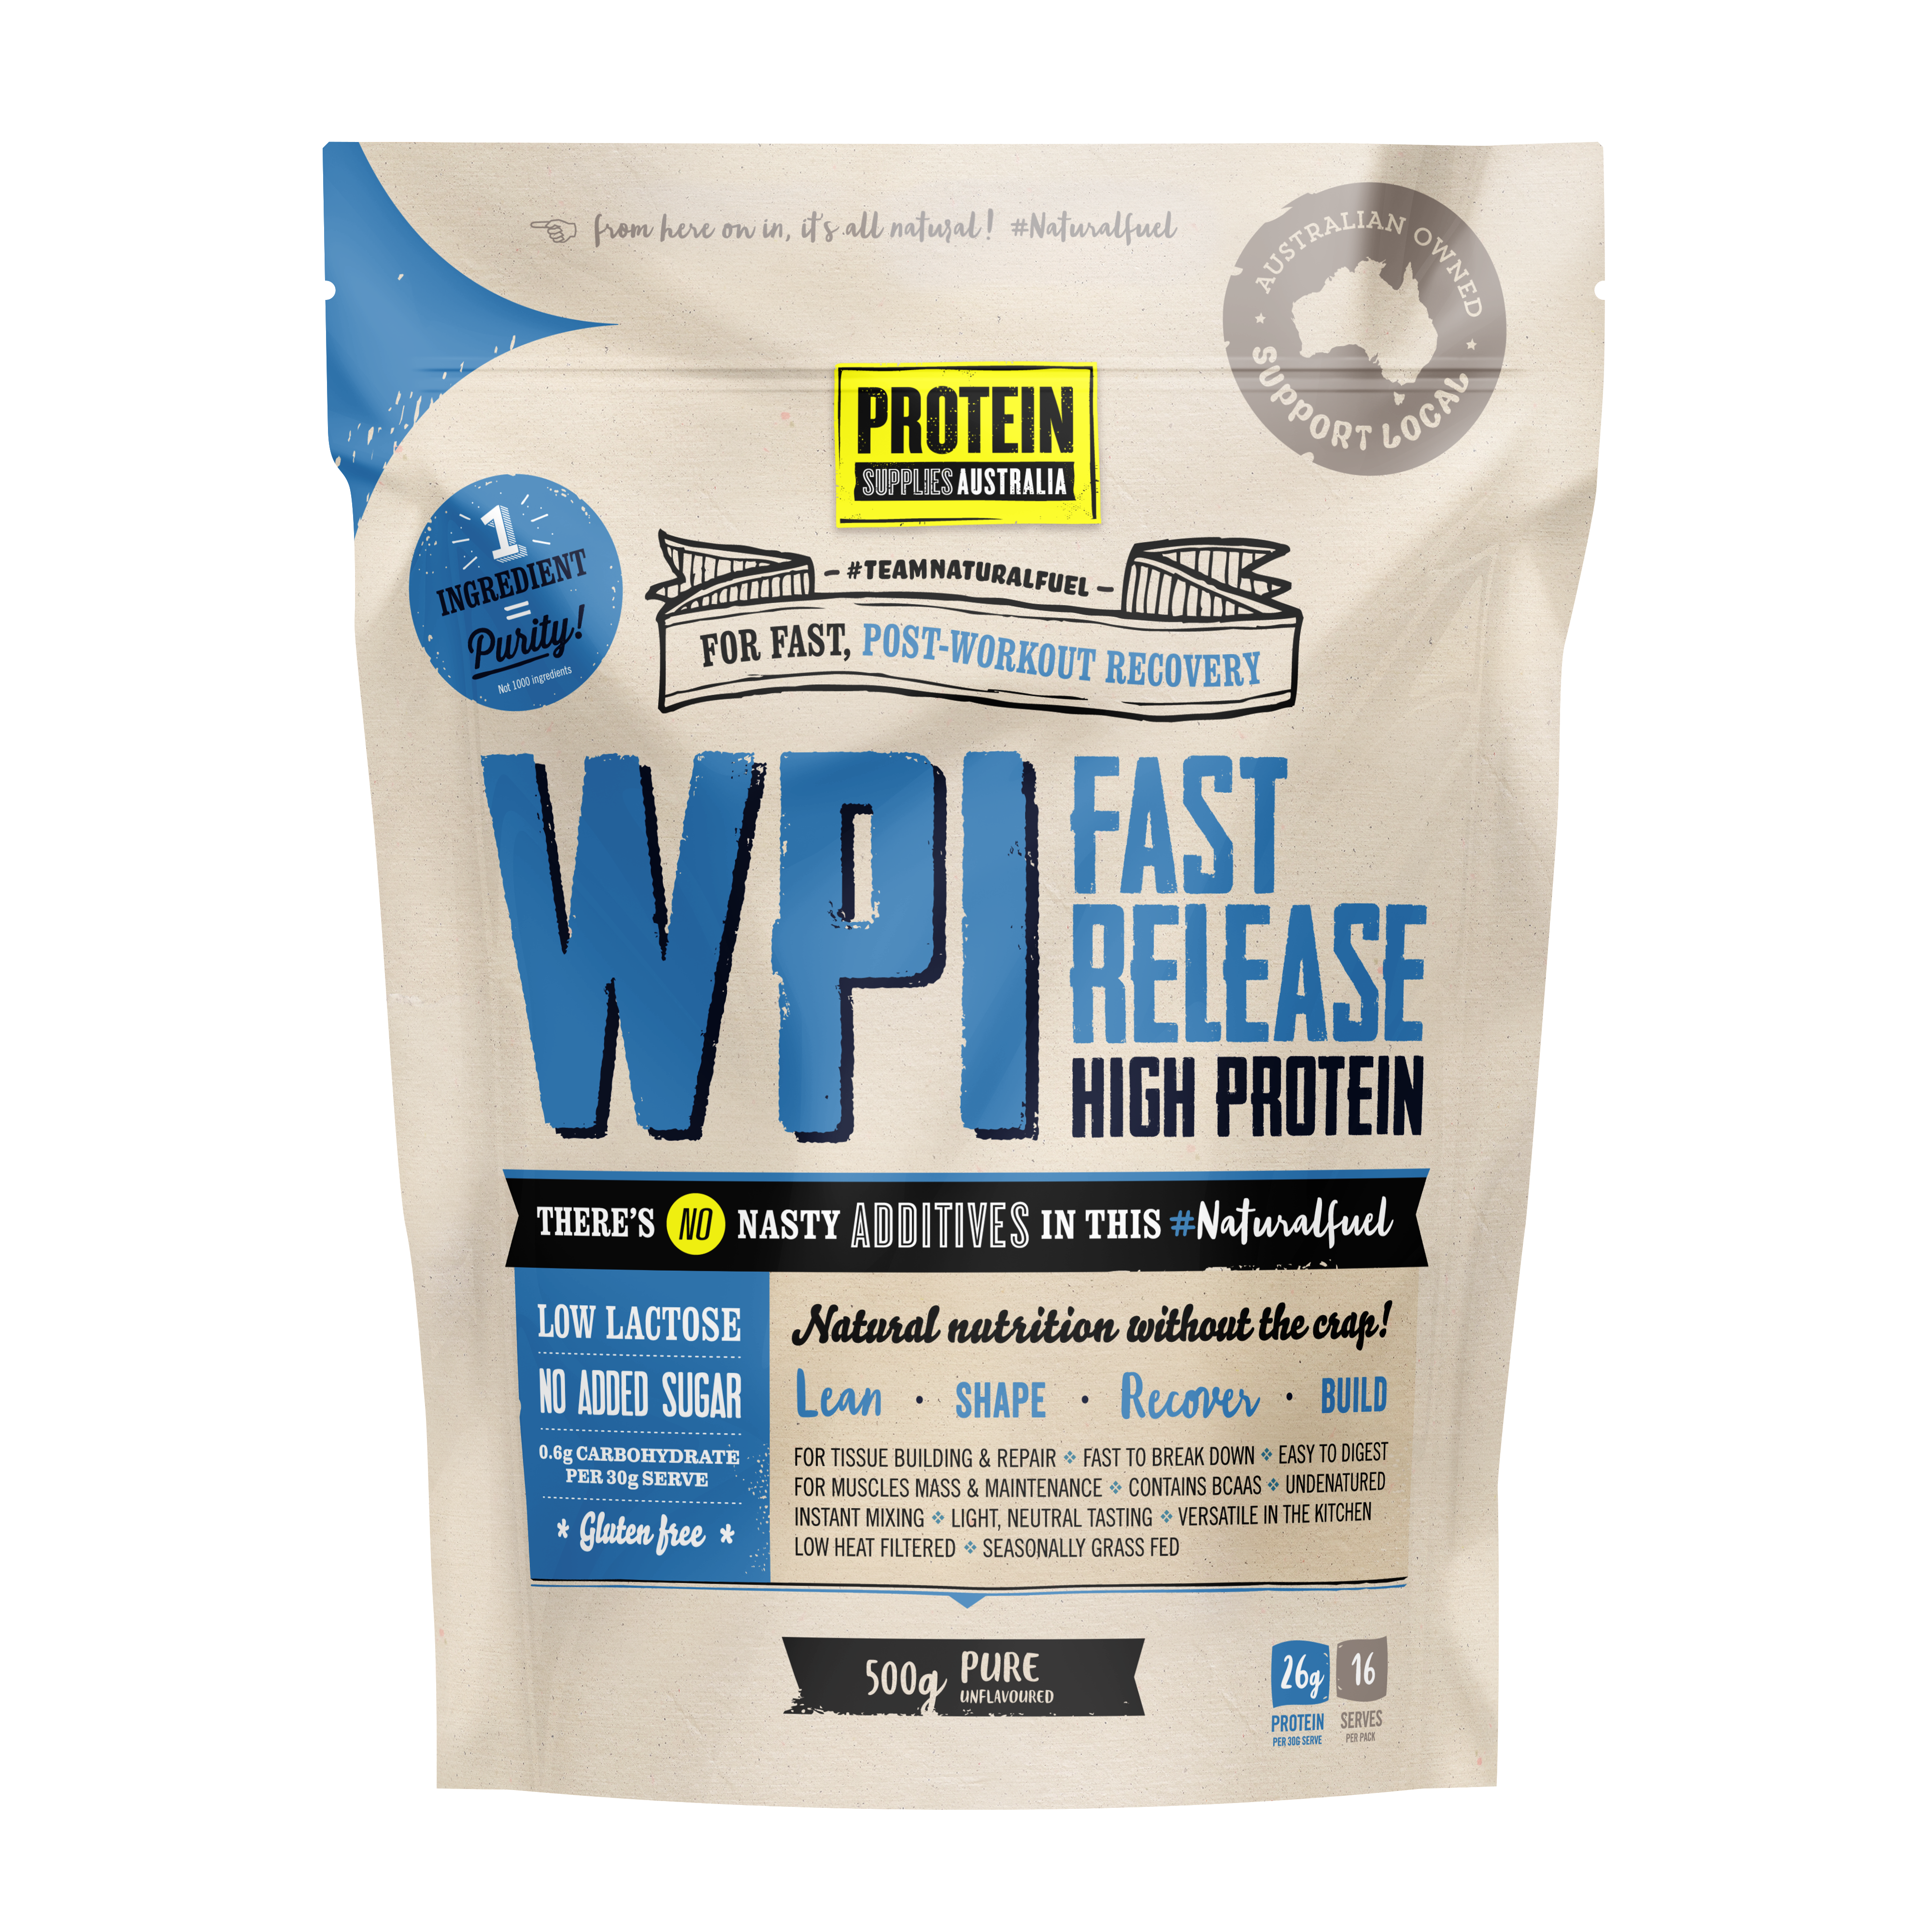 Protein Supplies Aust. Wpi (Whey Protein Isolate) Pure